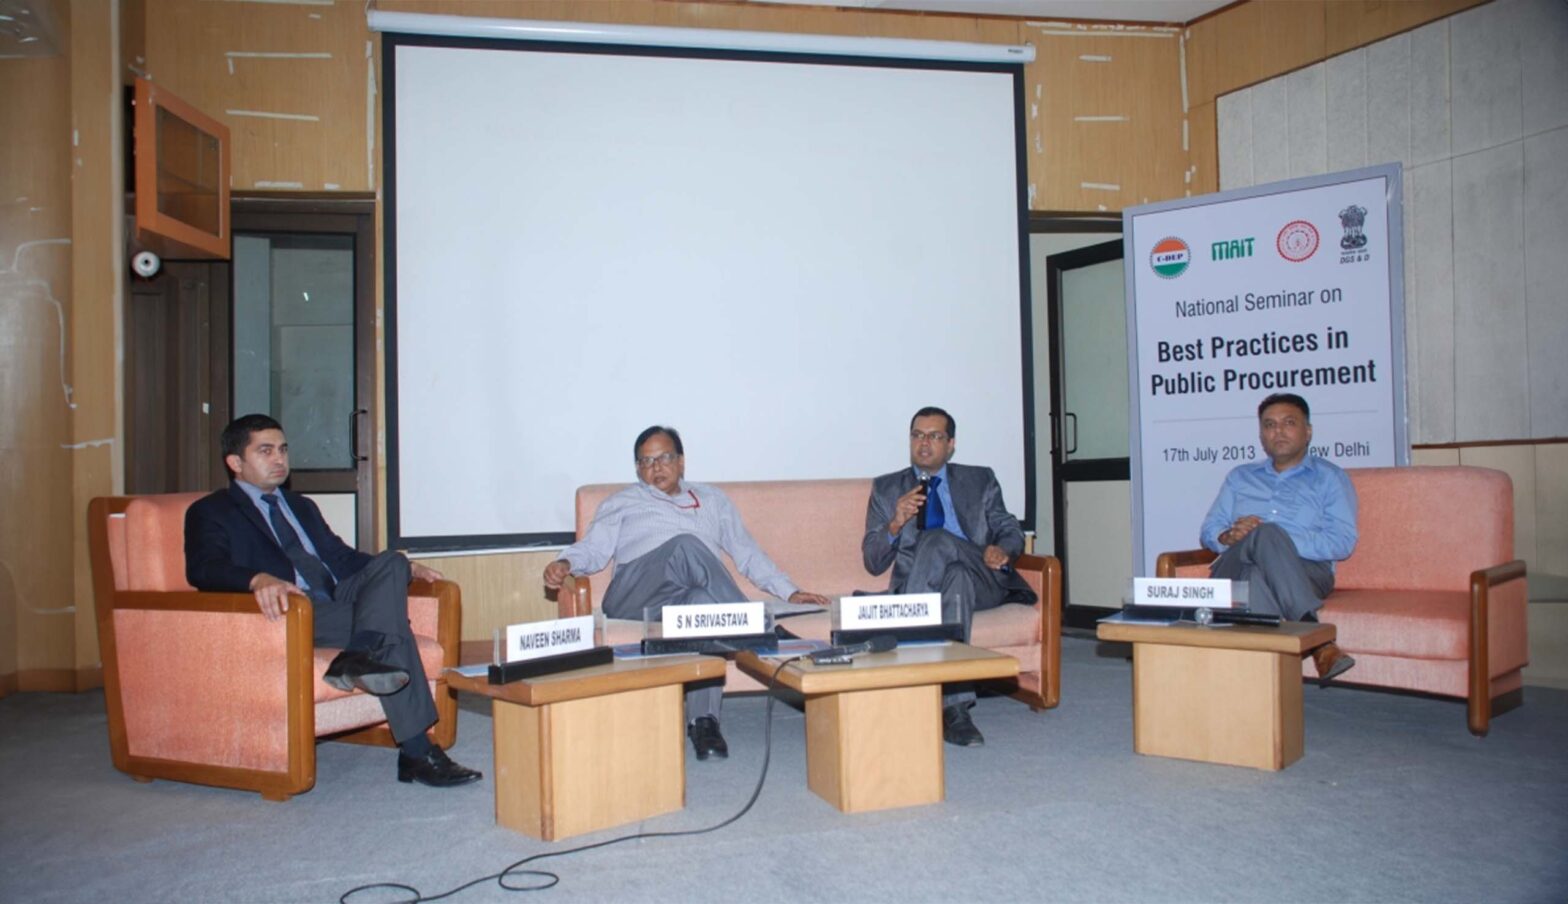 Report on National Seminar on Best Practices in Public Procurement in ICT